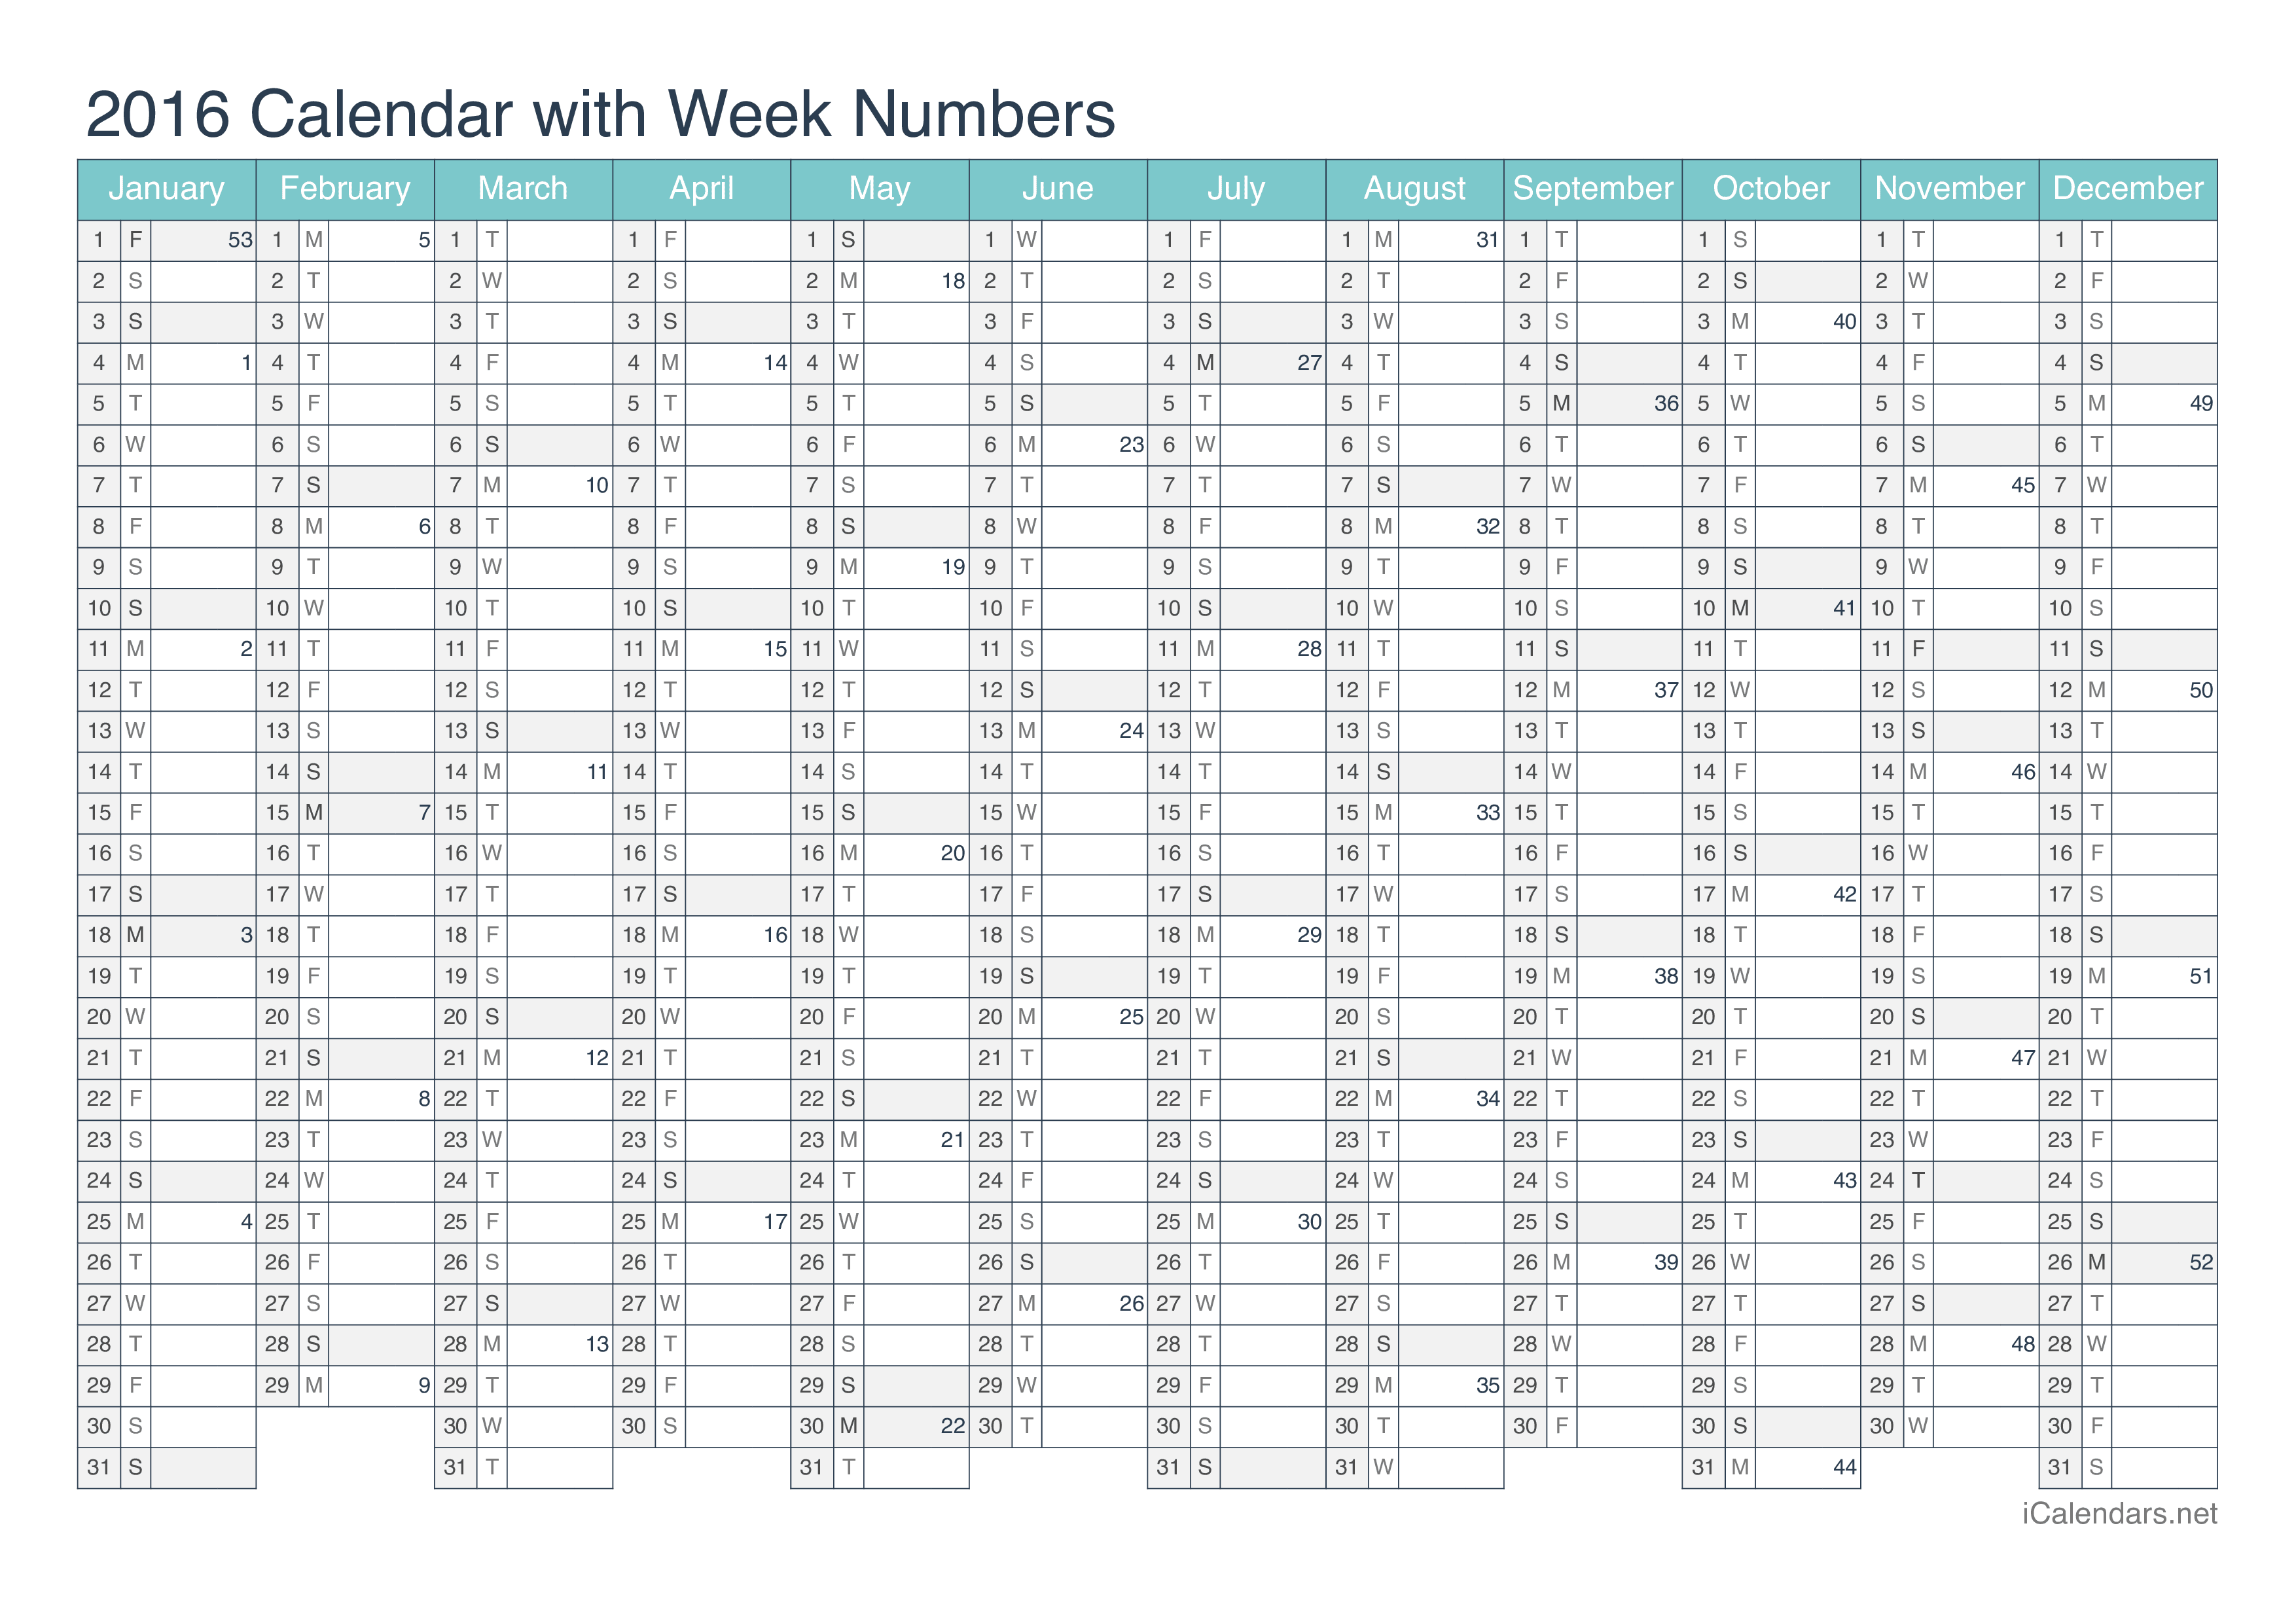 2016 Calendar with week numbers - Turquoise